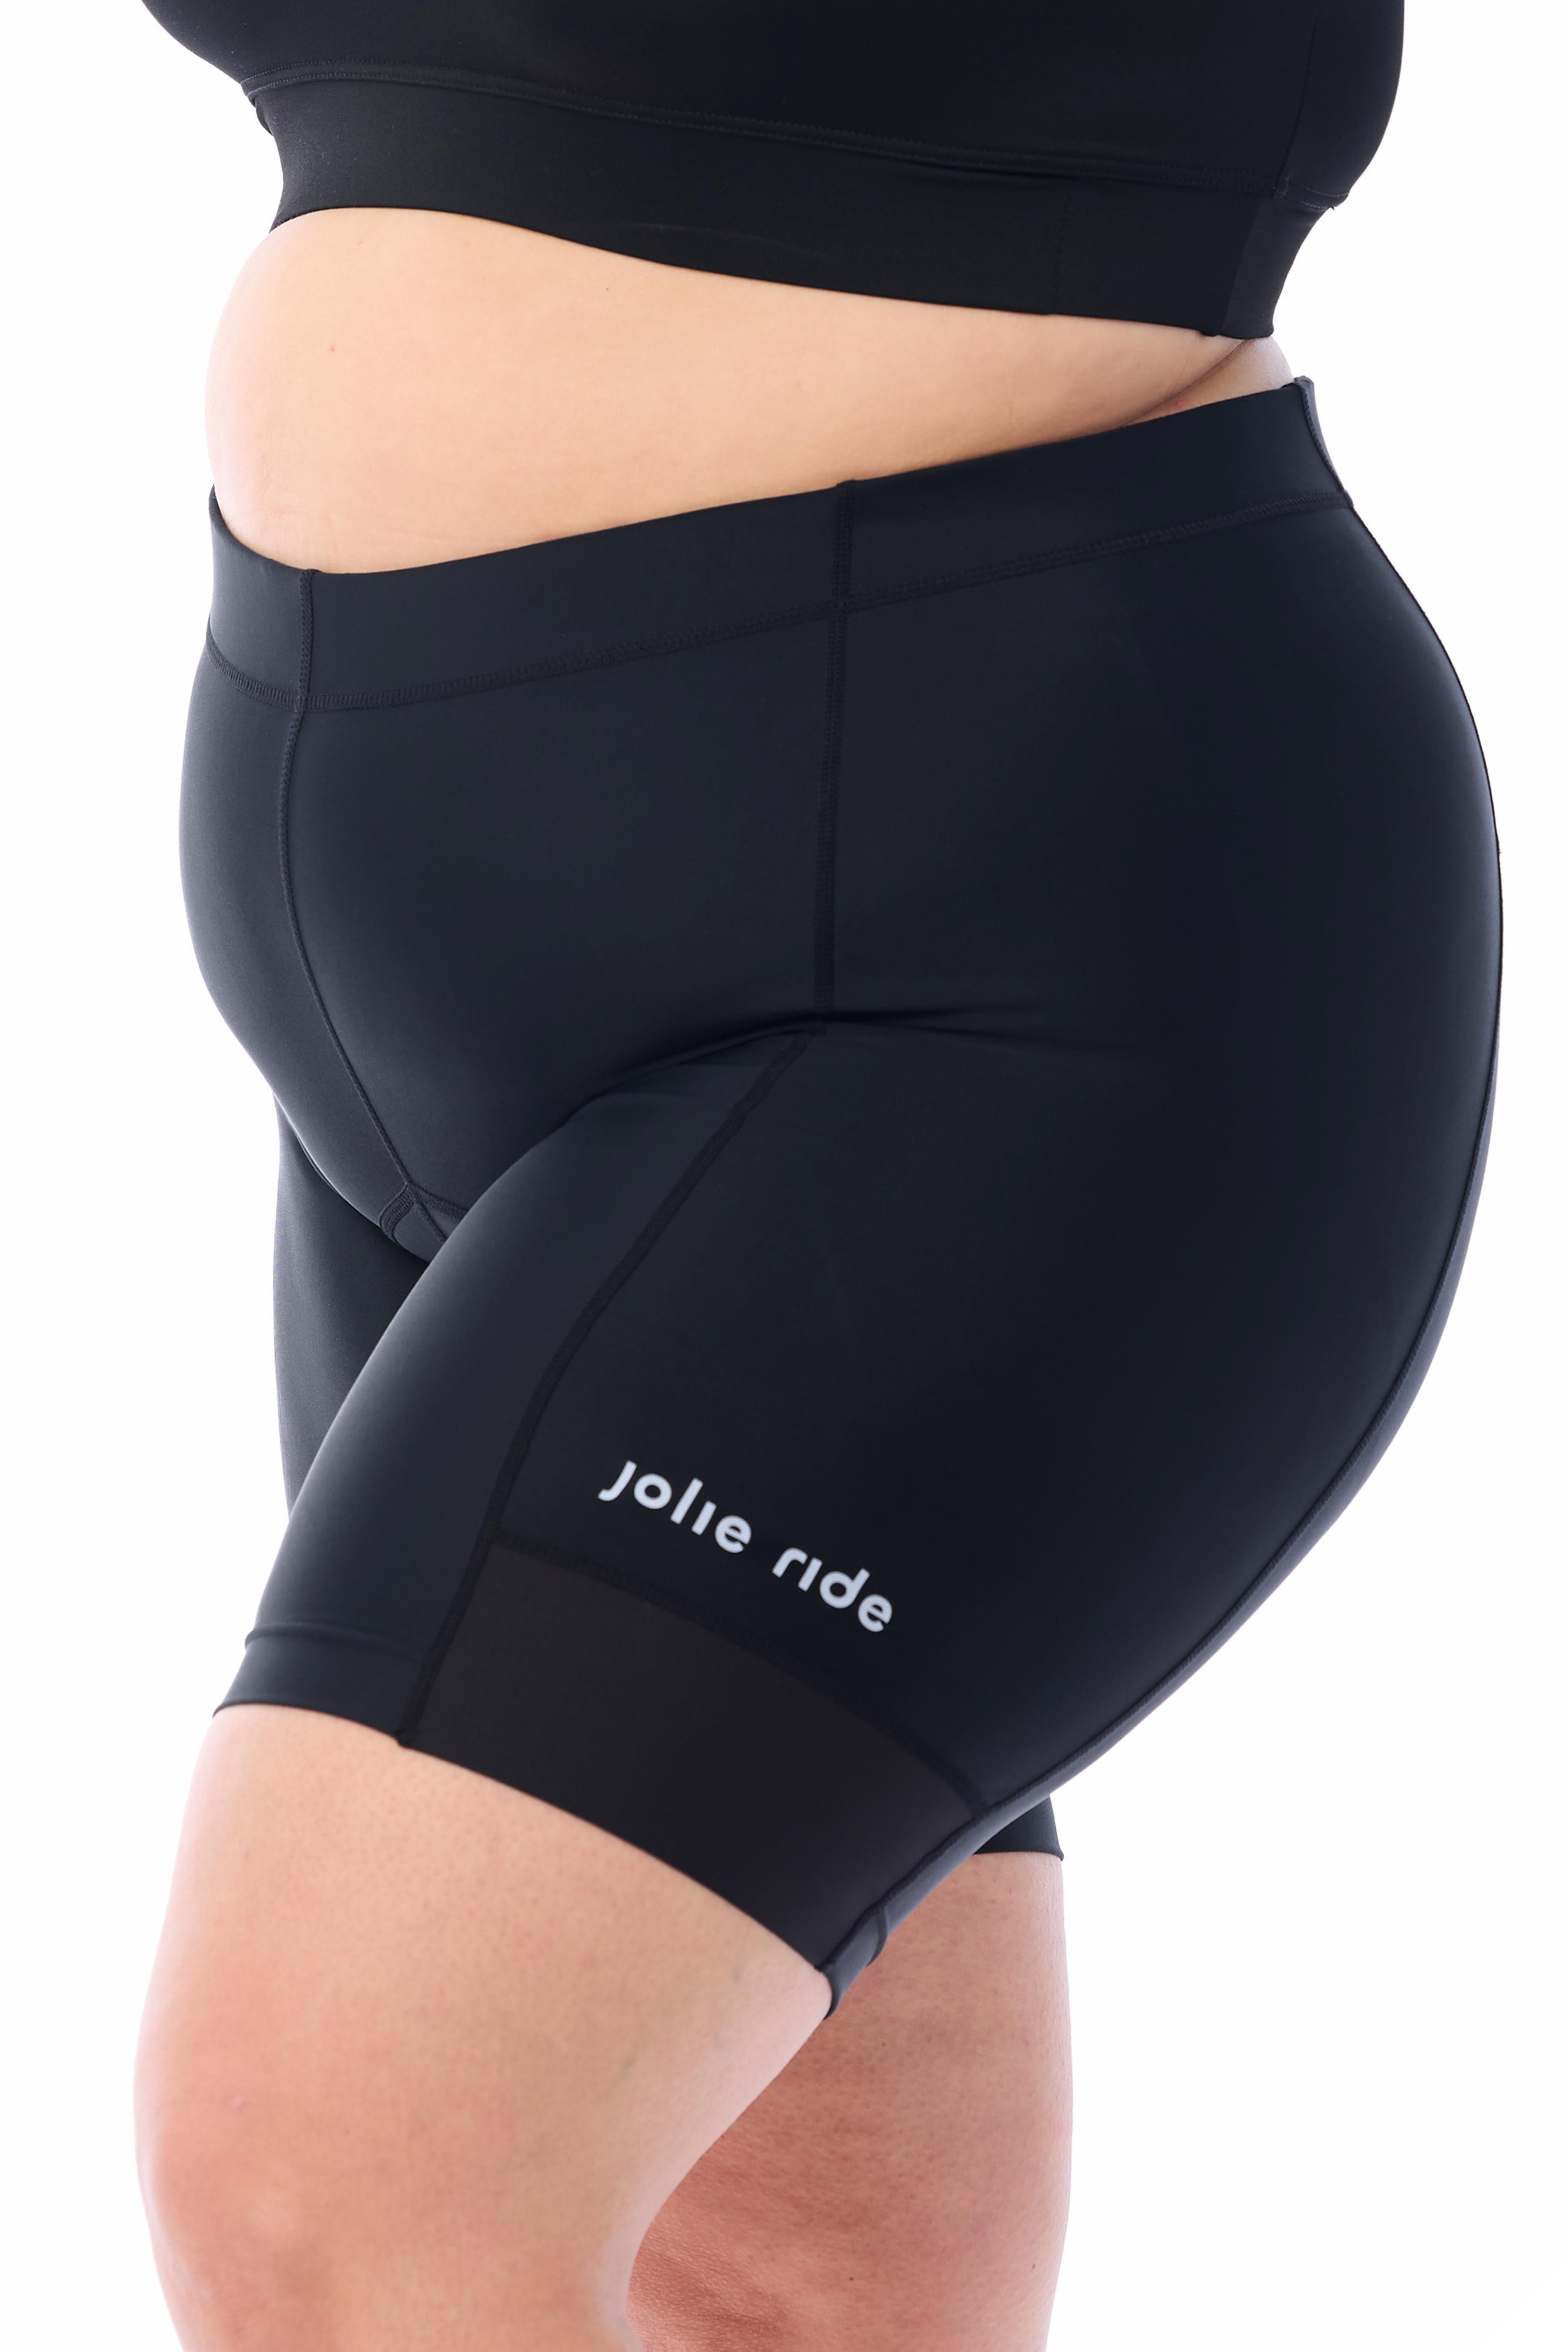 JolieRide Cycling shorts Black / 1X women's cycling shorts with 20cm inseam with anti-shock padding